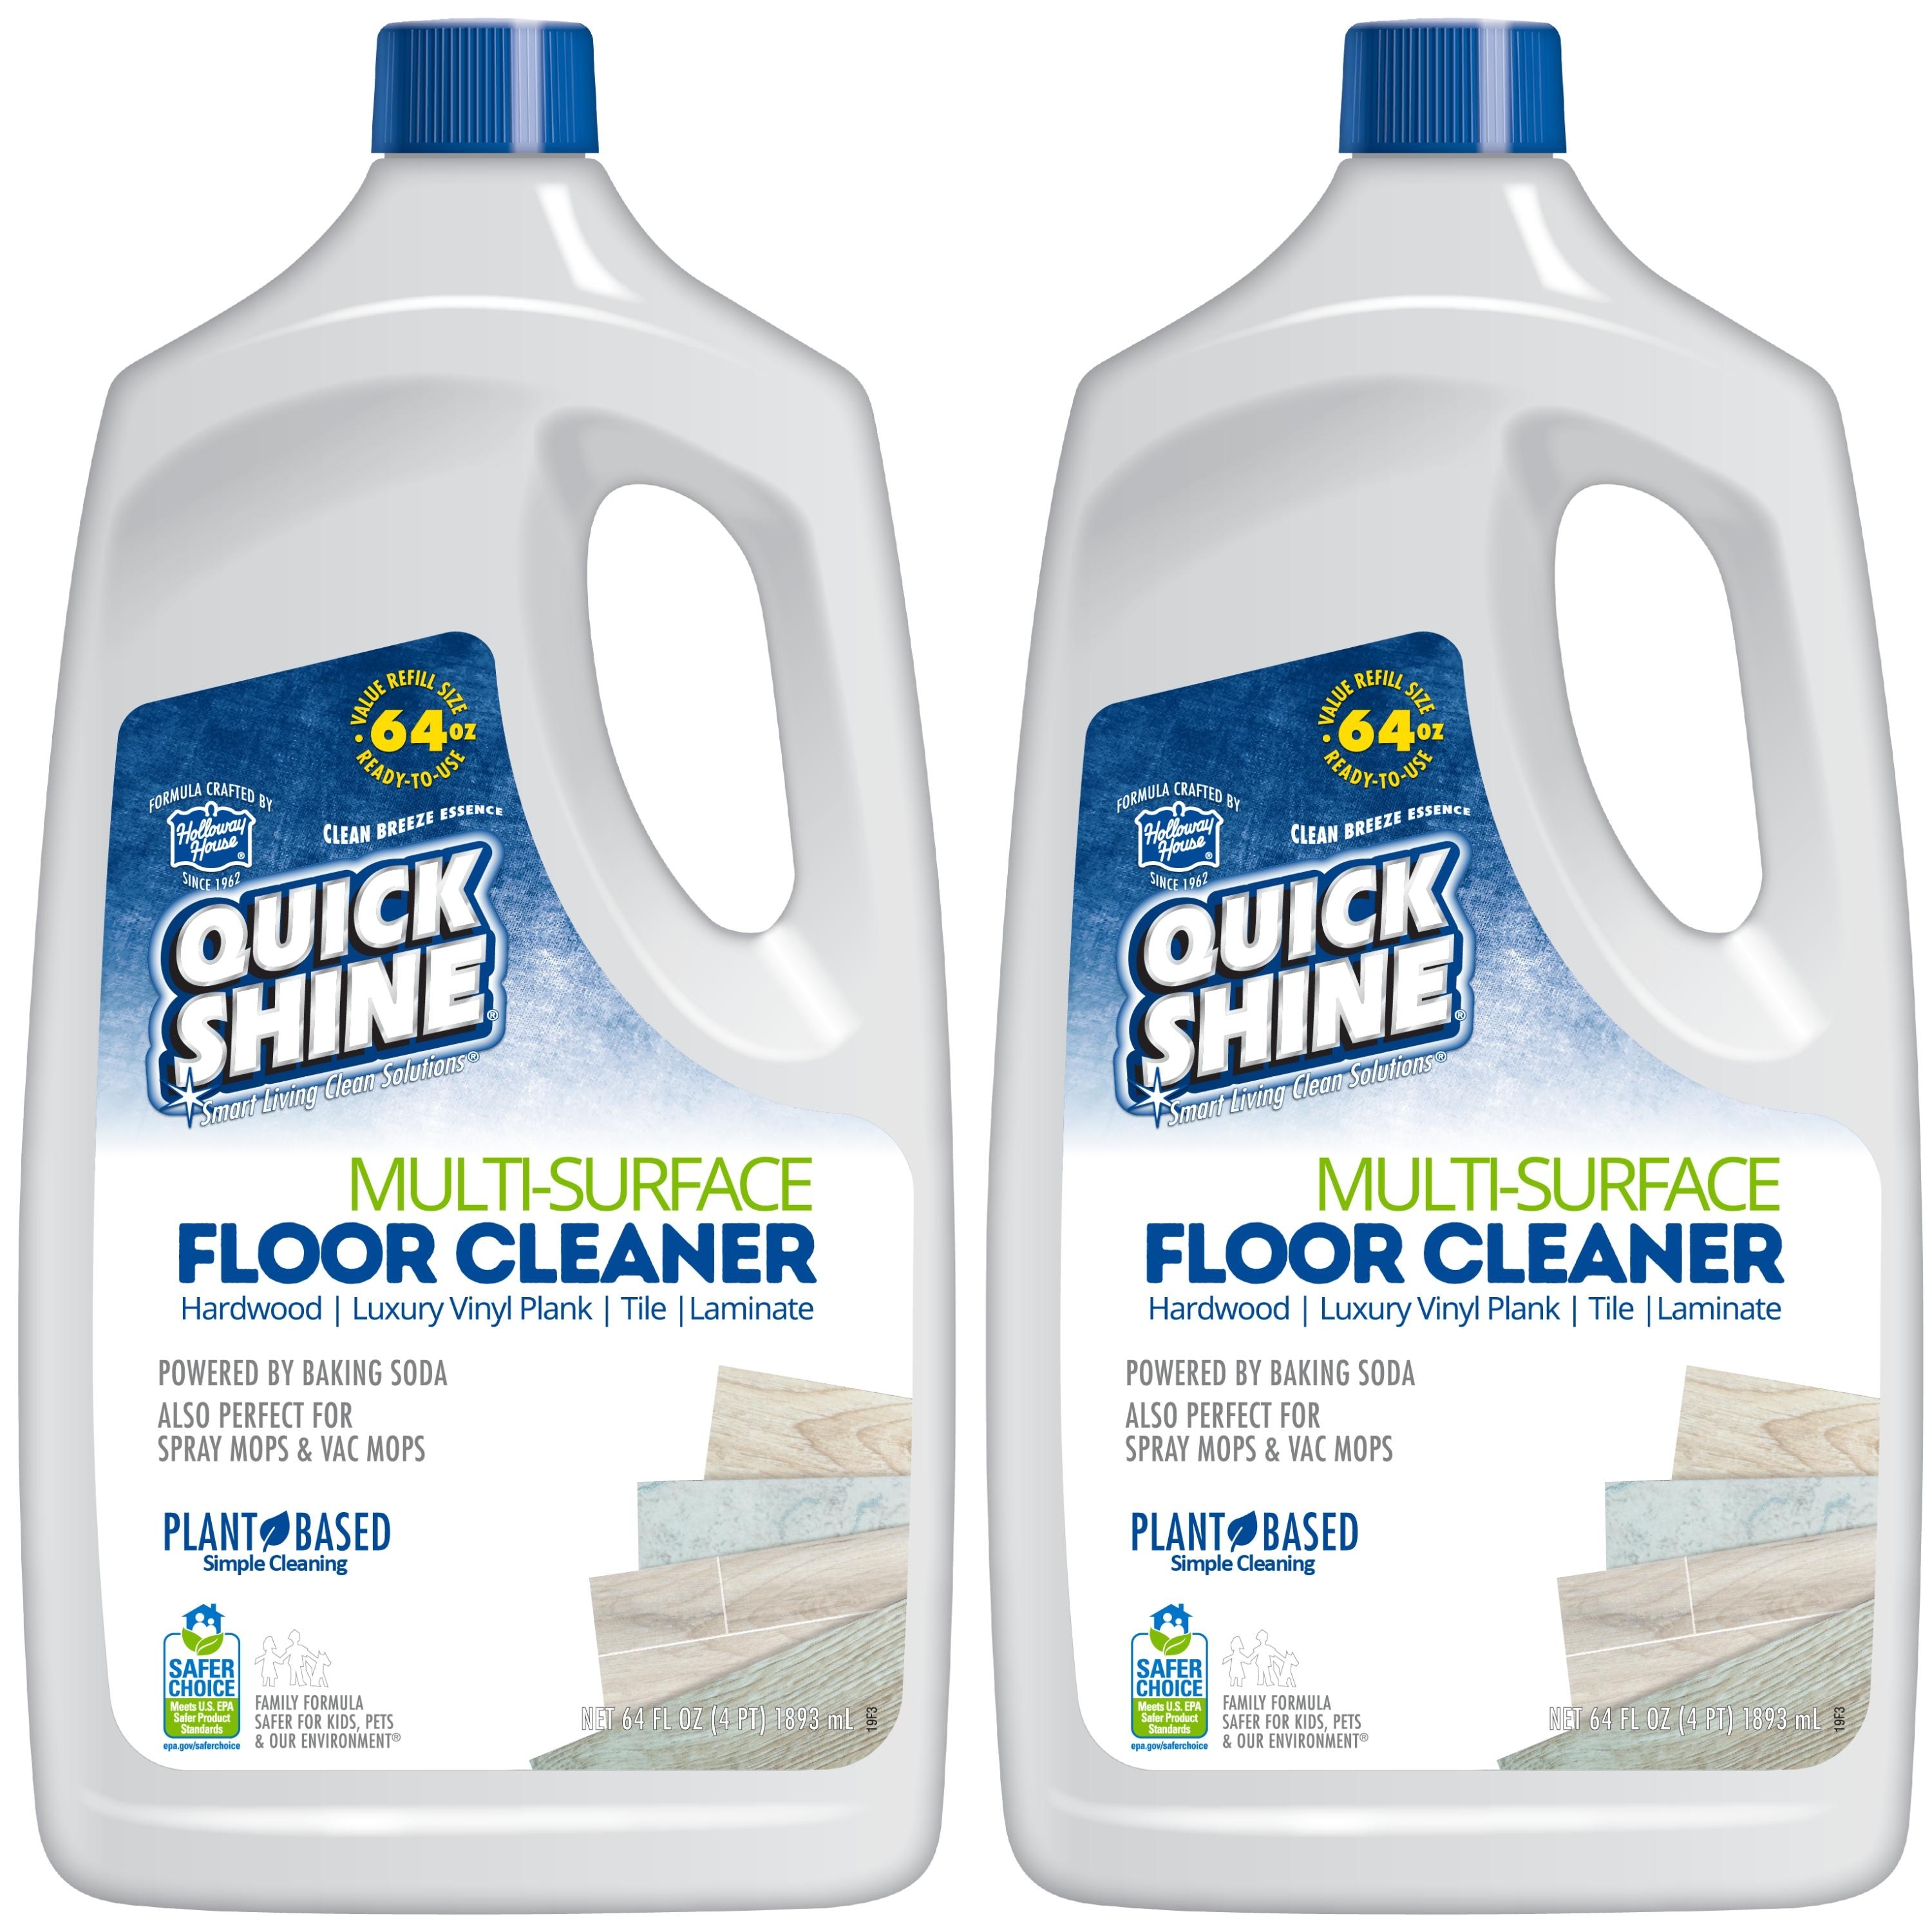 All Products - Quick Shine Floors